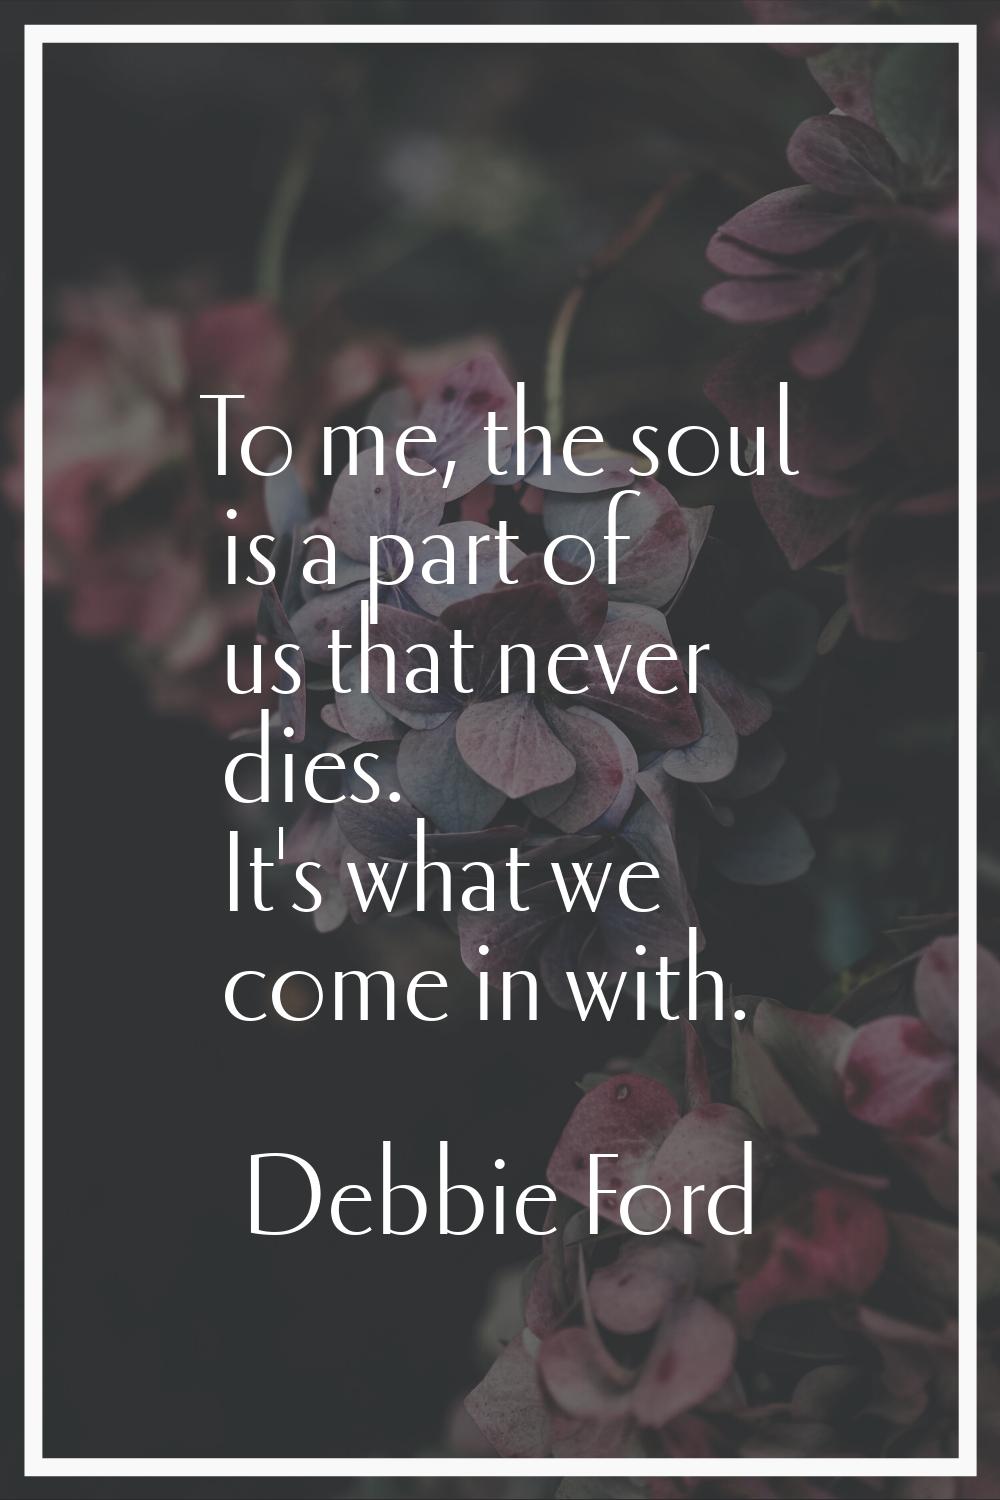 To me, the soul is a part of us that never dies. It's what we come in with.